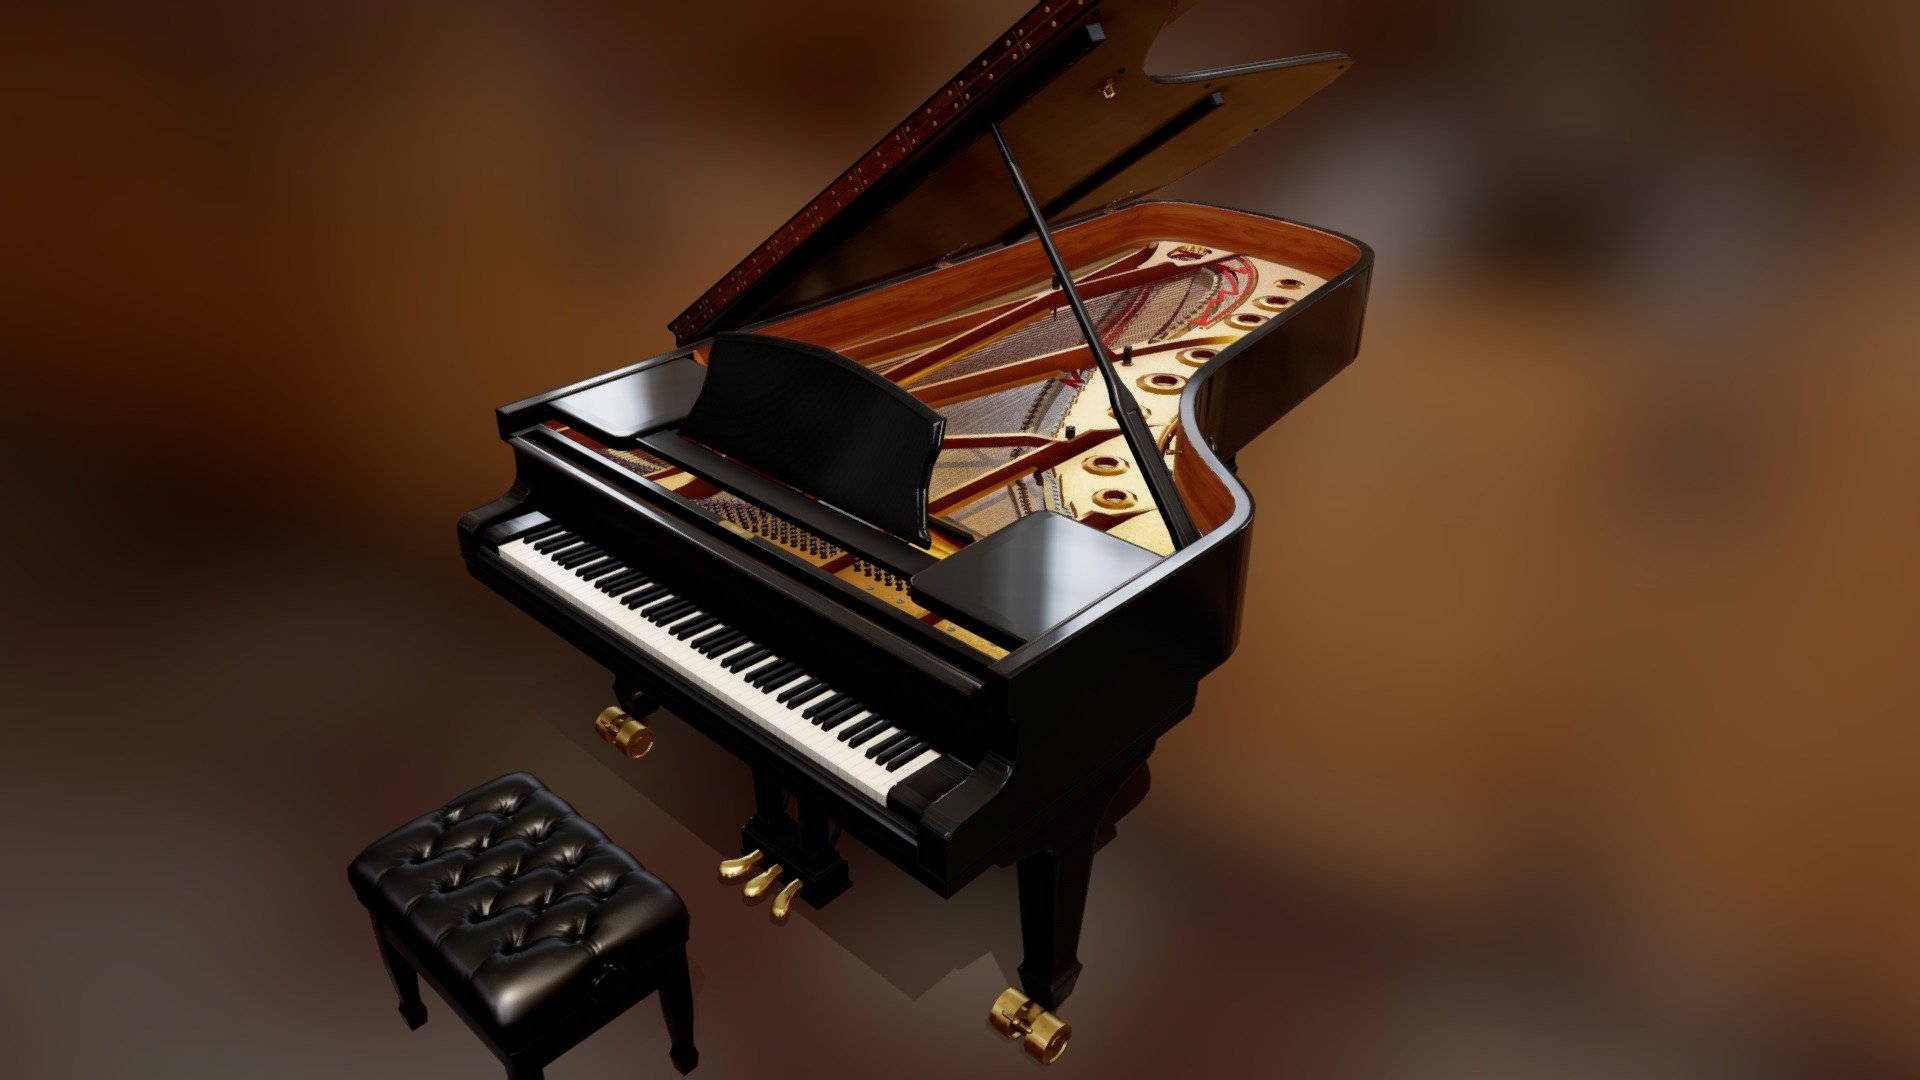 Brandless Grand Piano based on Steinway's Model D.

Modeled to scale and Optimized for use as the main piece of a real-time scene. Primarly made for arch viz in Unreal Engine 4, but may be used with any PBR renderer.

The Mesh is triangulated and edges are split.

The UVs are tightly optimized, overlapping only on repeating geometries.

The Textures are 2048x2048 png

The Rig only covers the non-playable aspect of the piano (Keys, Hammers, Action and Pedals are not rigged) 

The Animations are simple 1 frame poses.

Additional files include .uasset for UE 4.20 and up (drag and drop in your project's content folder (in FileExplorer, not UE4 ), instantly ready for use)

The UE4 implementation allows you to easily:




Change the Pose of the piano and seat

Change their colors

Enable a secondary color for the seat

Toggle visibility of seat and music rack

UE4 Features: i.imgur.com/B6K7oRy.gifv

I'll be glad to answer any questions or issue regarding the model - Grand Piano - Buy Royalty Free 3D model by AlexPo (@owex) 3d model